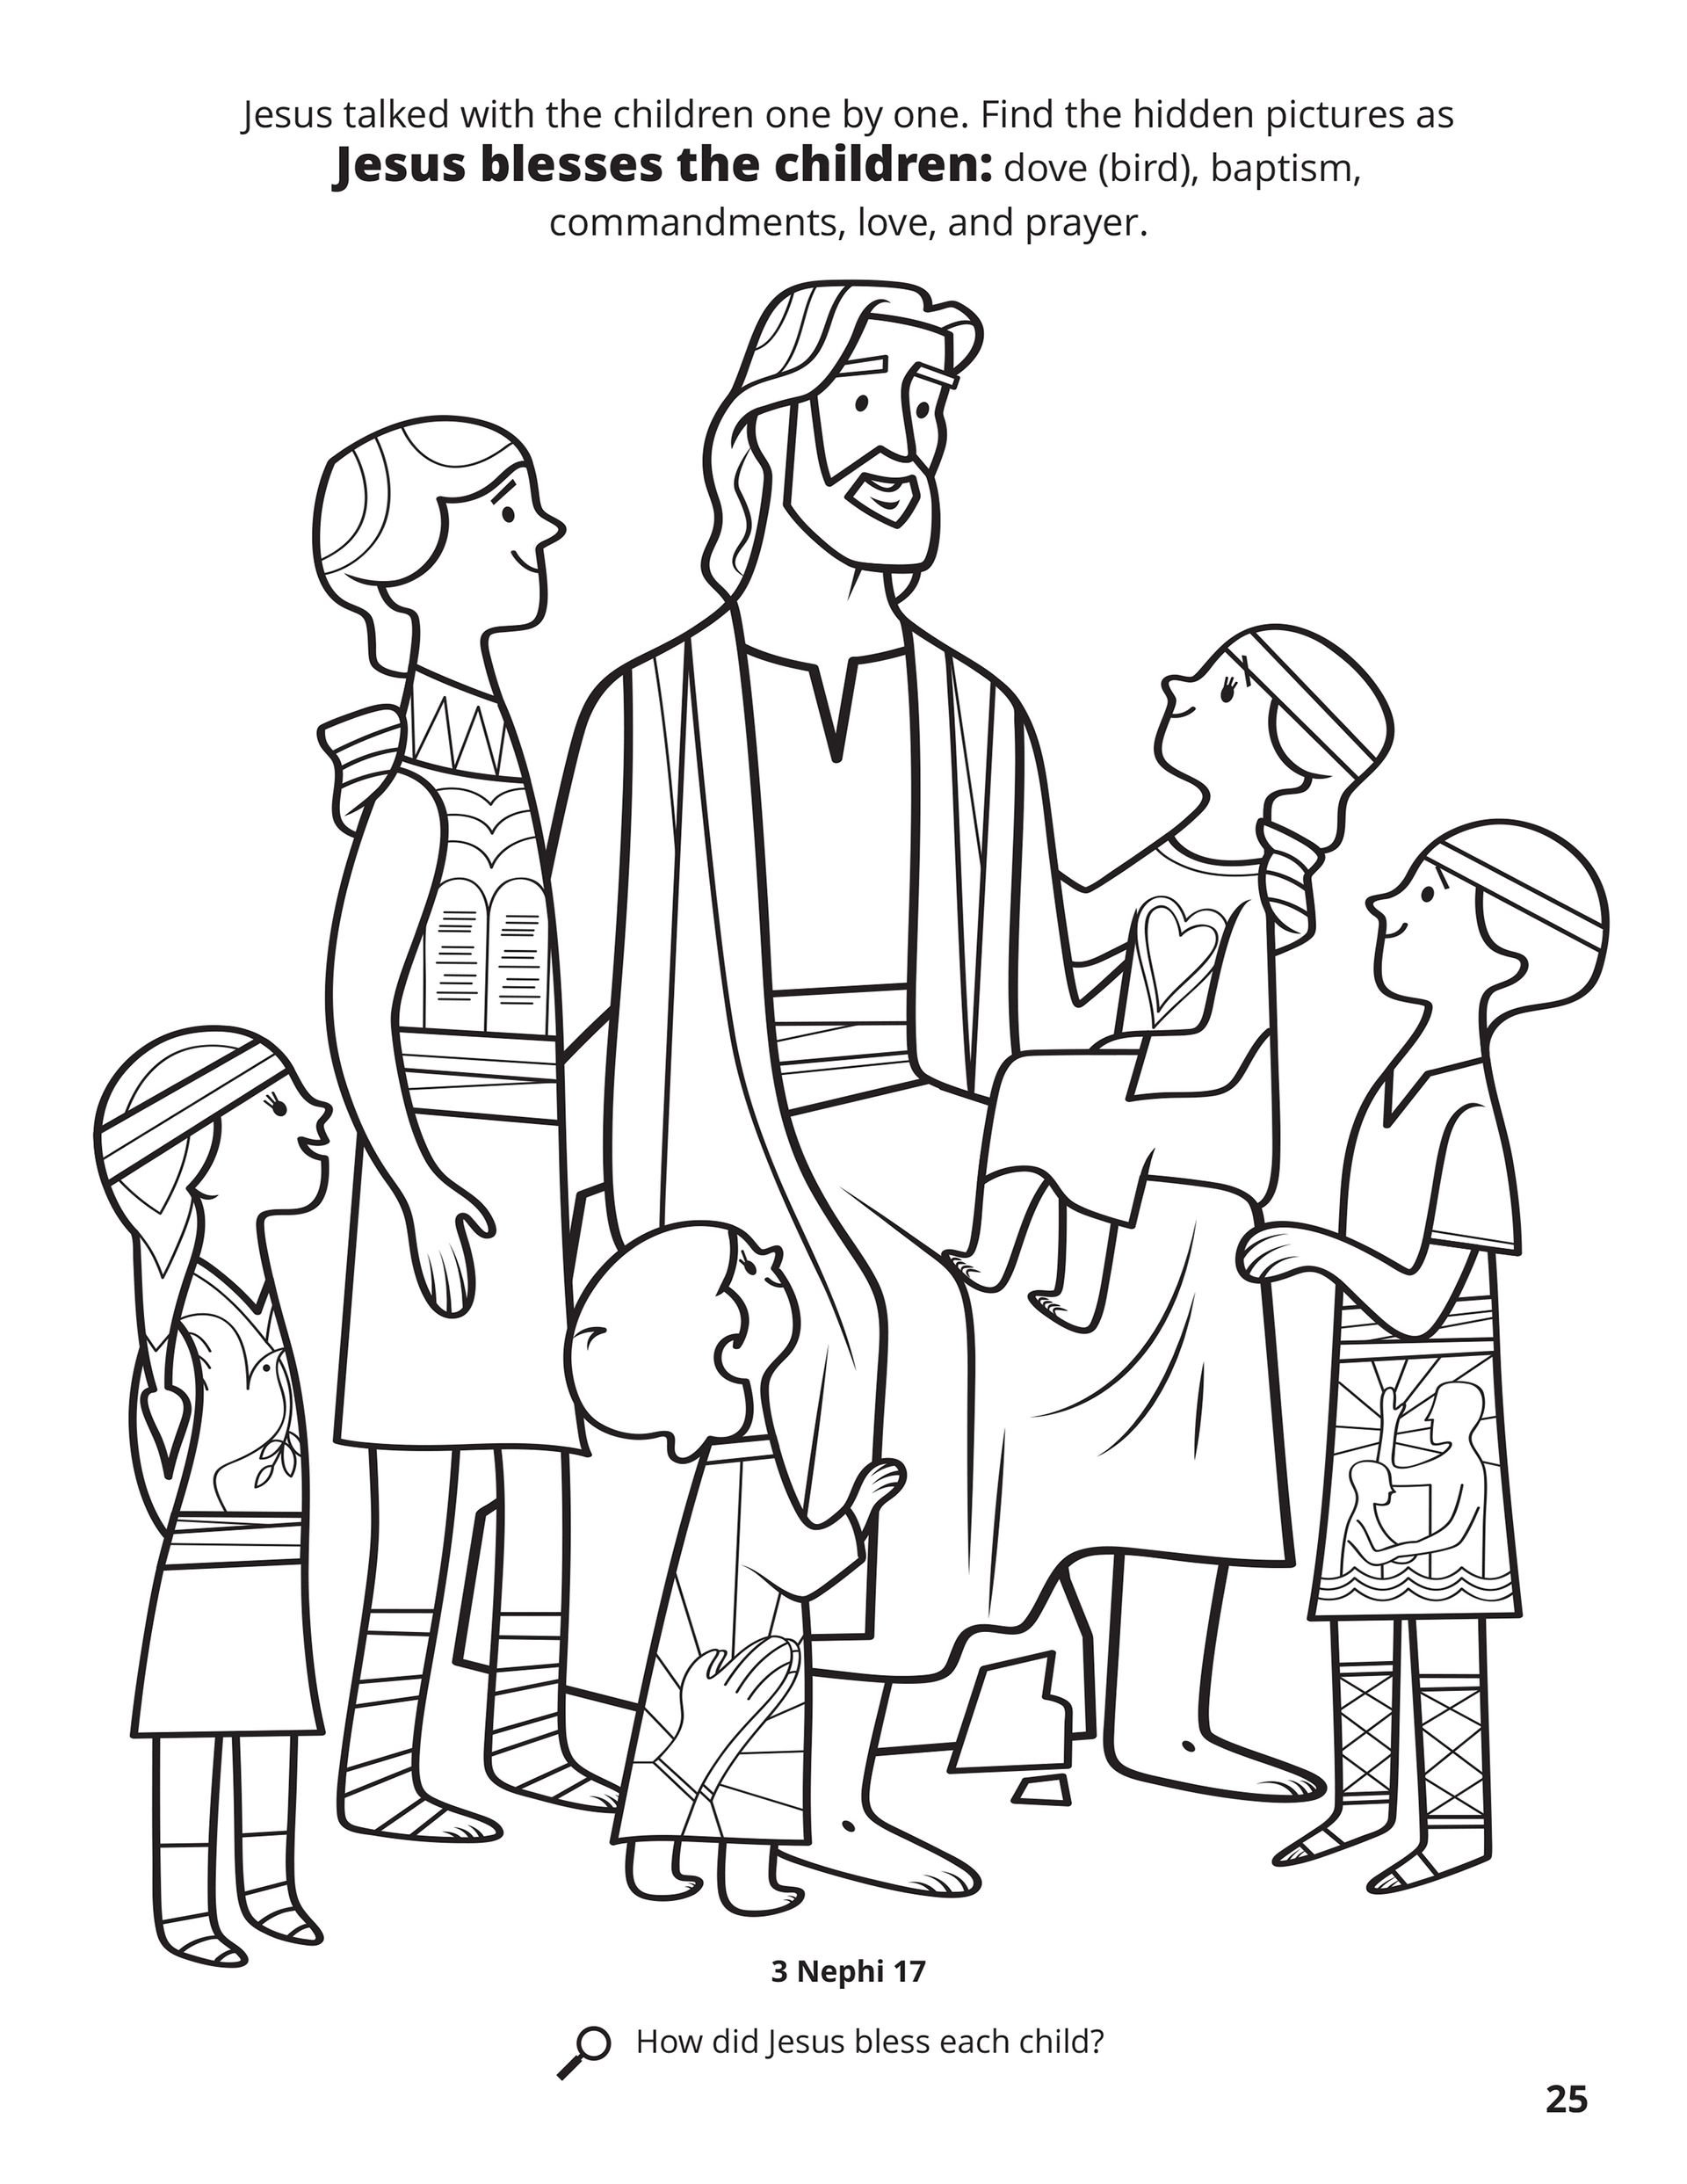 Jesus talked with the children one by one. Find the hidden pictures as Jesus blesses the children: dove (bird), baptism, commandments, love, and prayer. Location in the Scriptures: 3 Nephi 17. Search the Scriptures: How did Jesus bless each child?